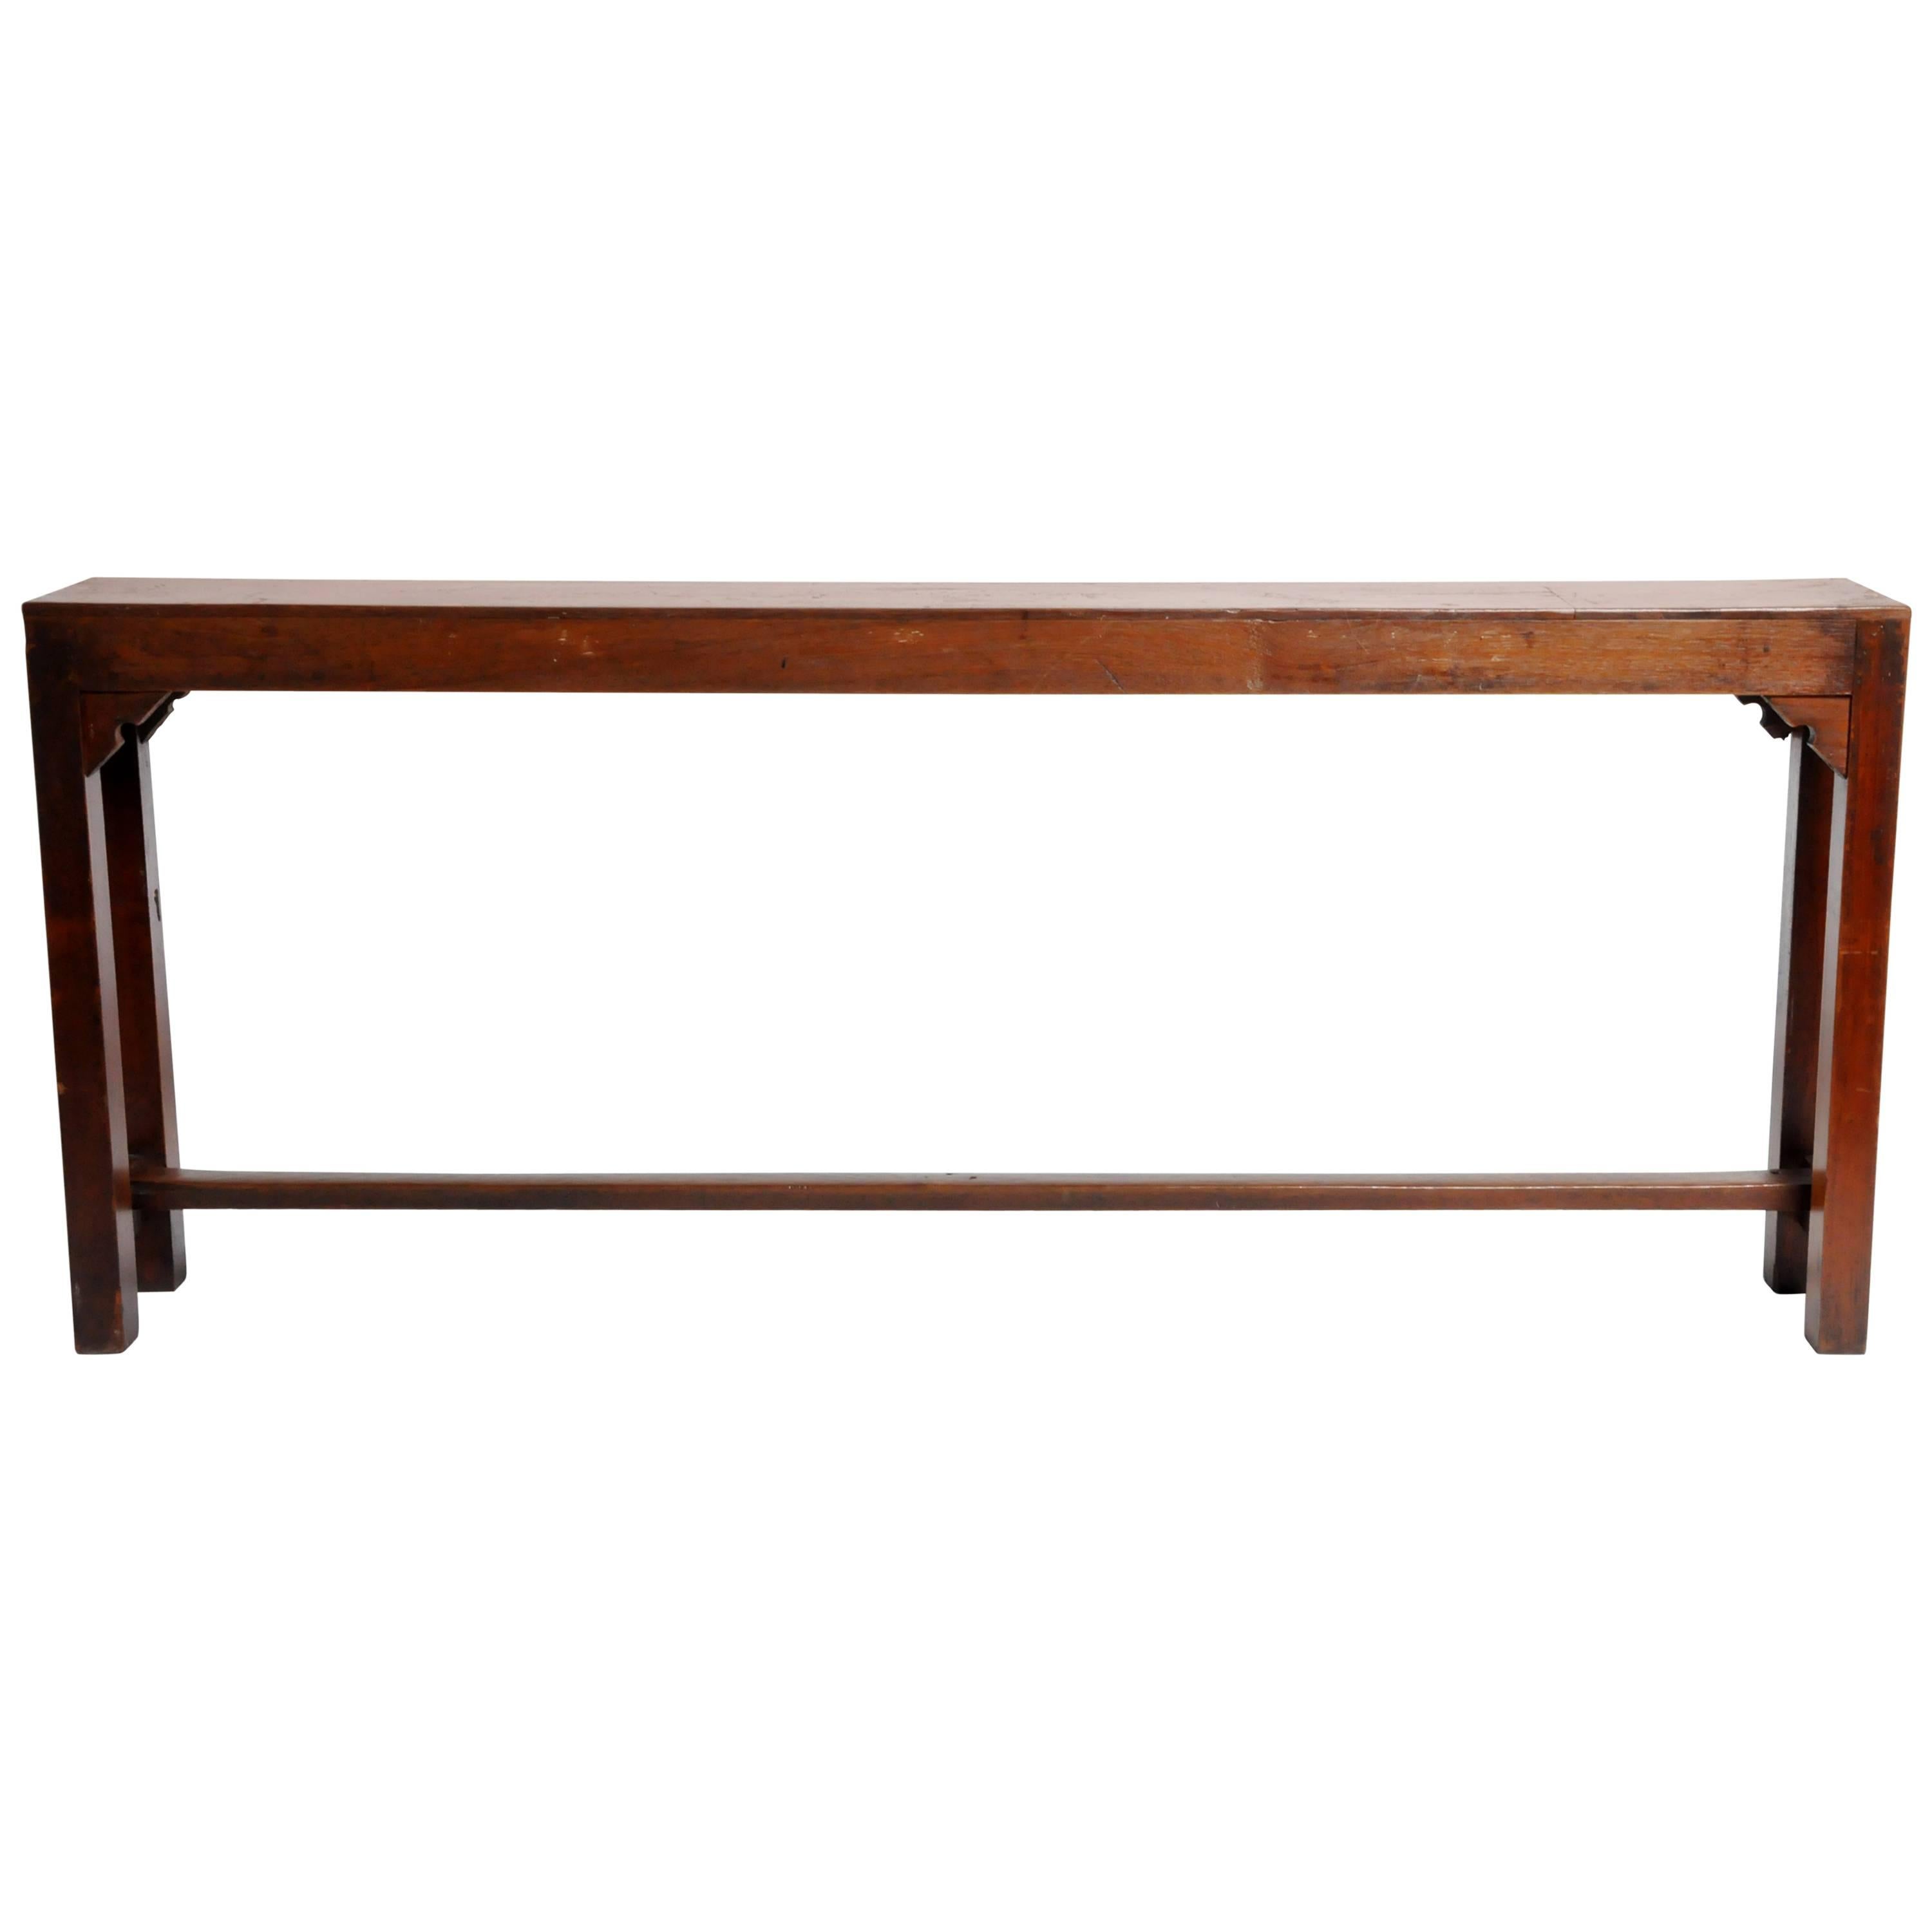 British Colonial Altar Table with Original Patina